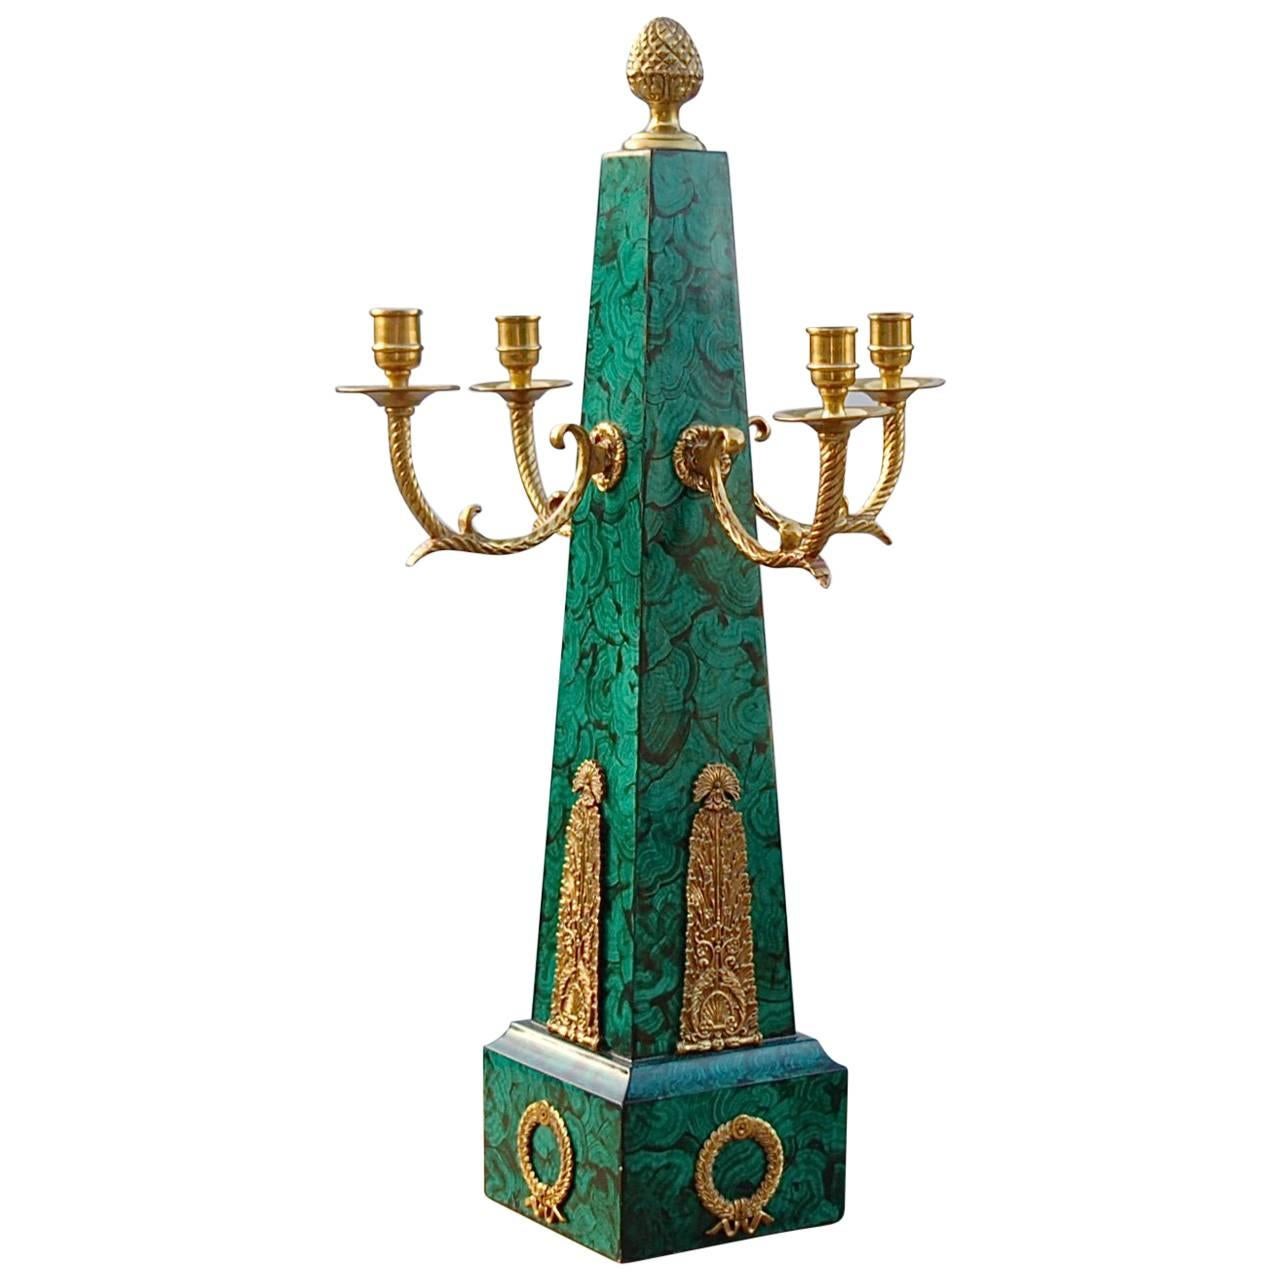 Obelisk Candleholder with Brass and Faux Malachite Finish